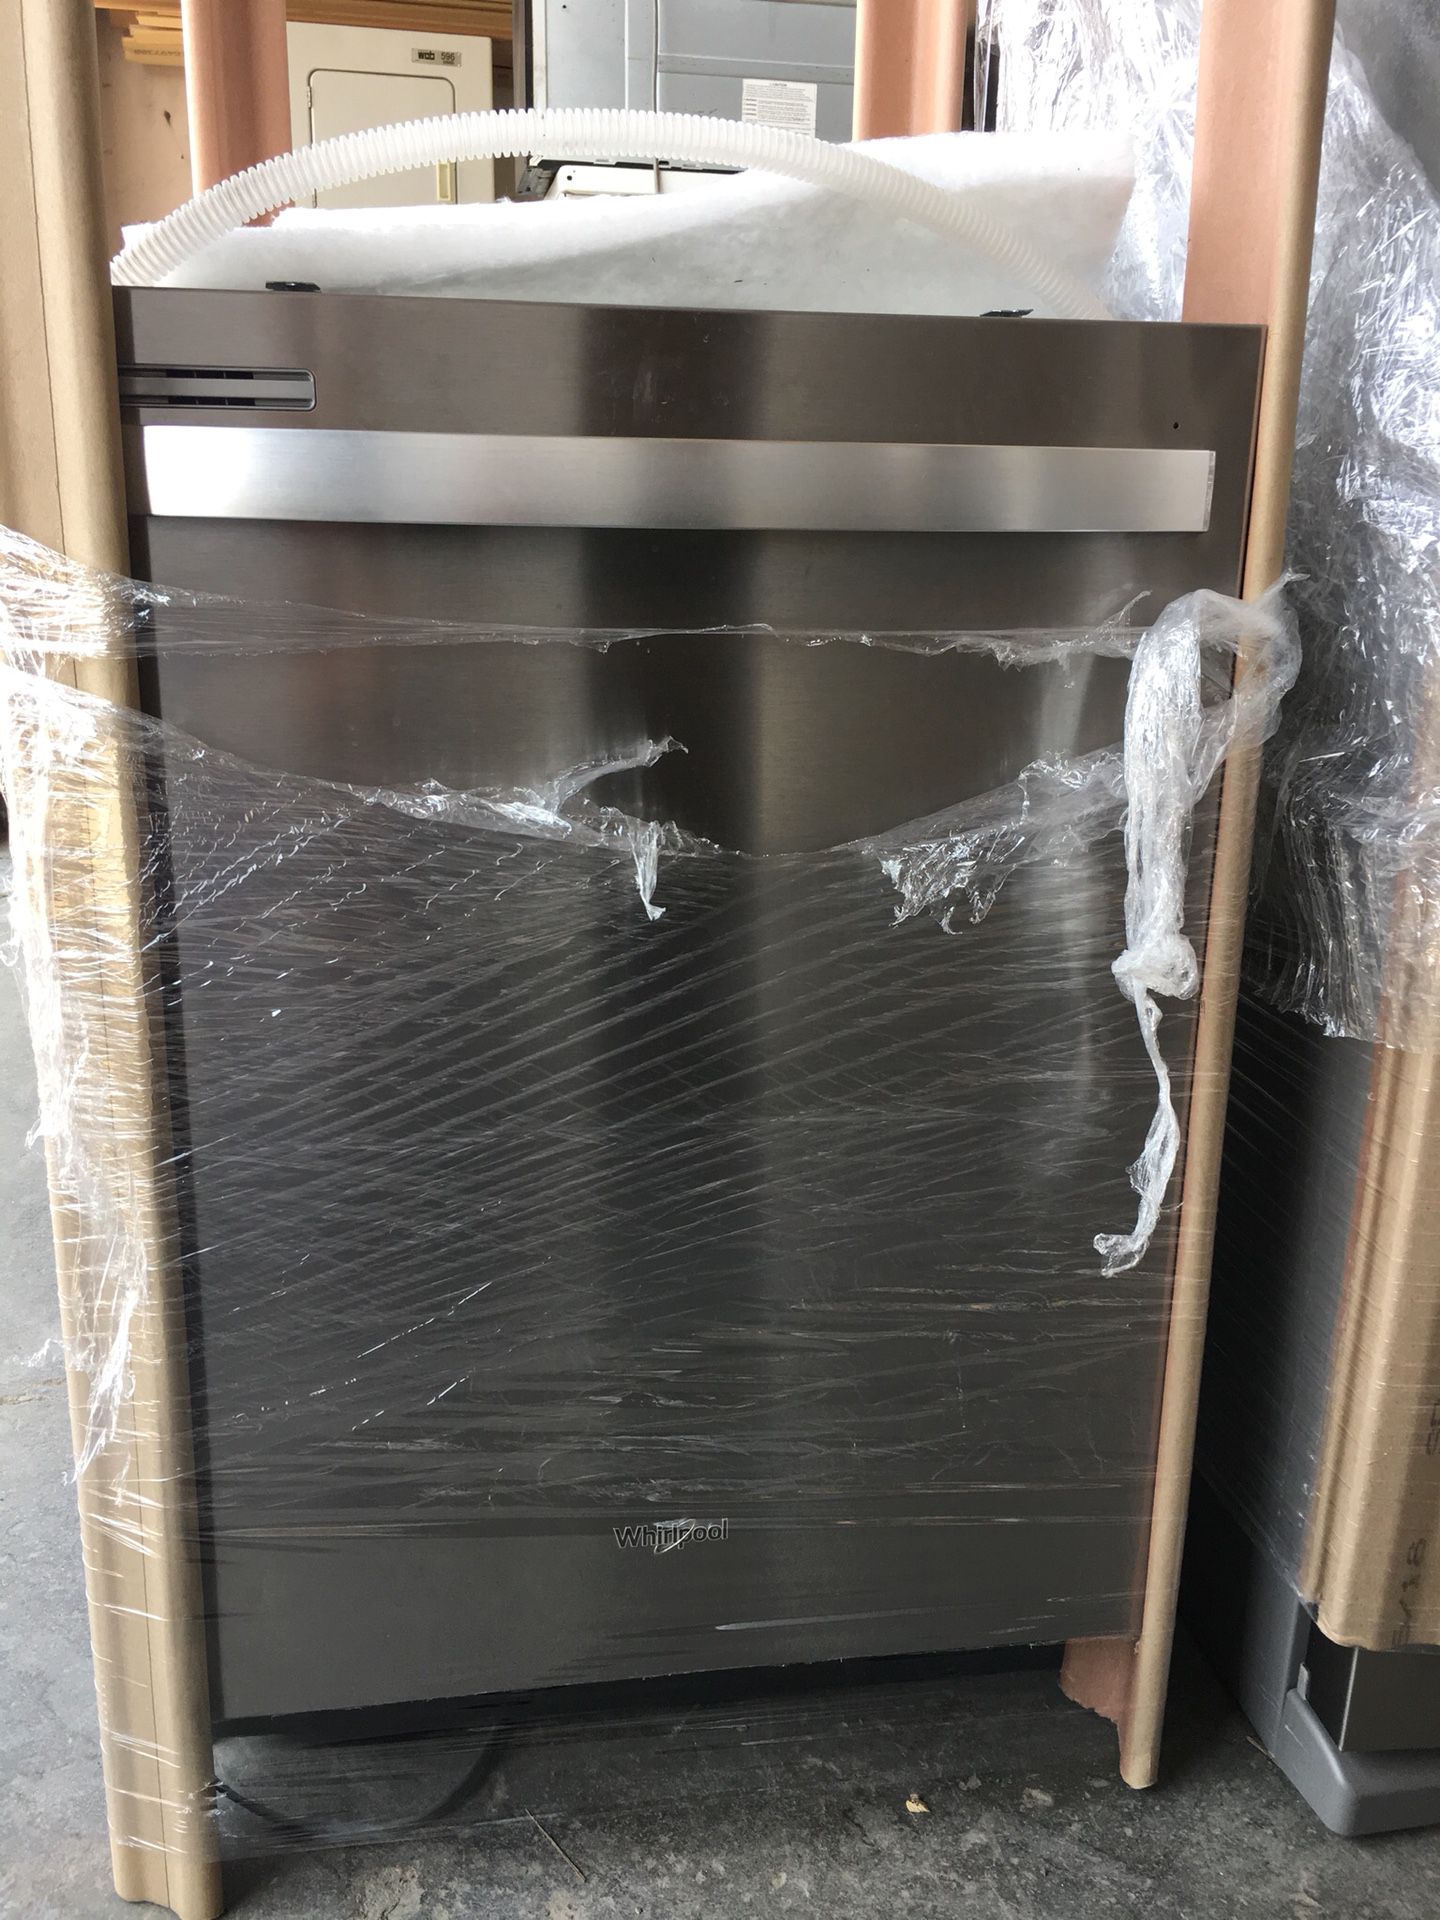 New Whirlpool Stainless Steel Dishwasher